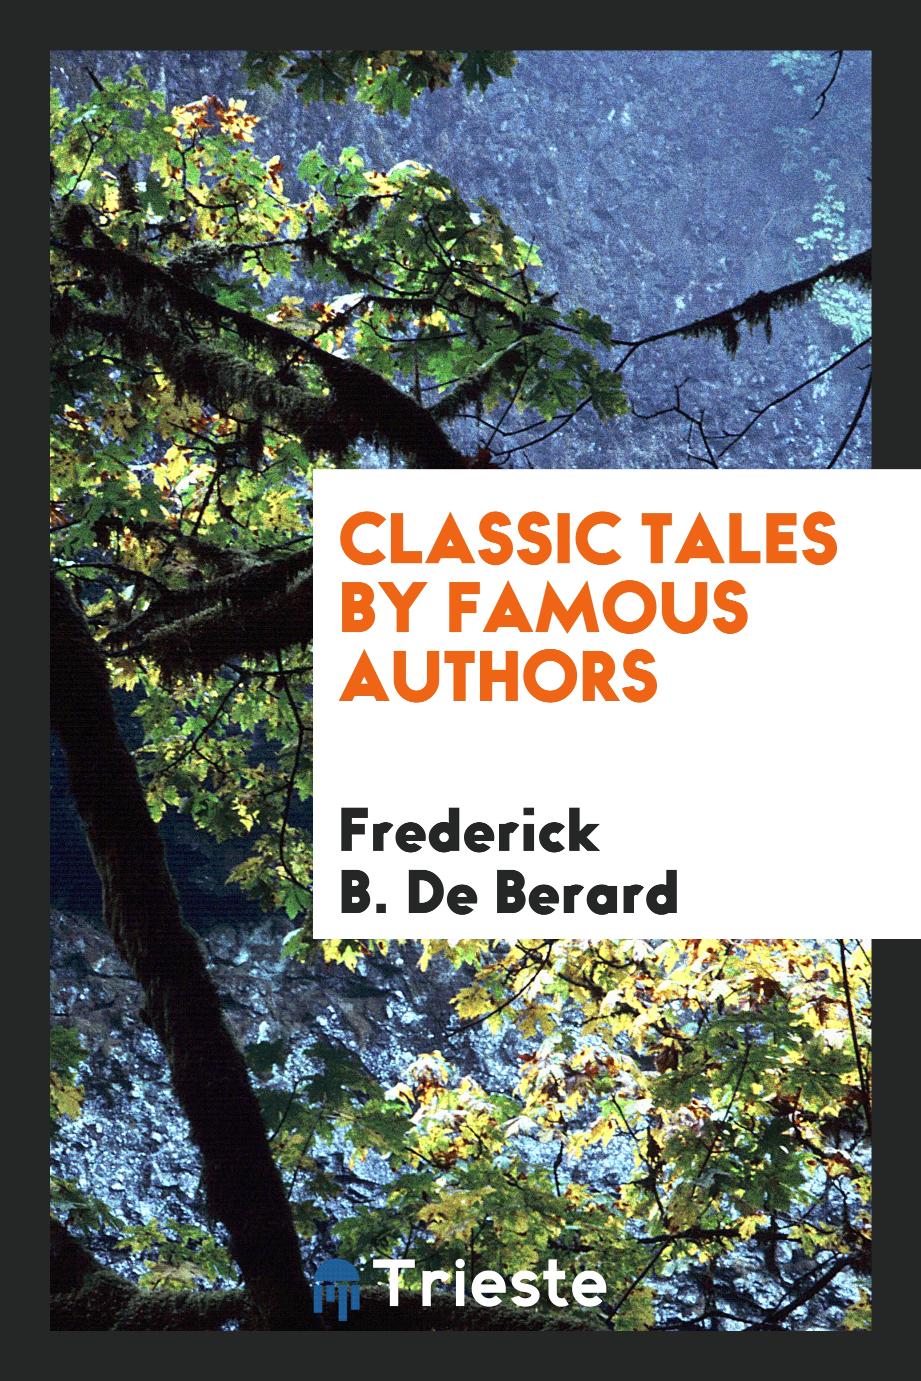 Classic tales by famous authors